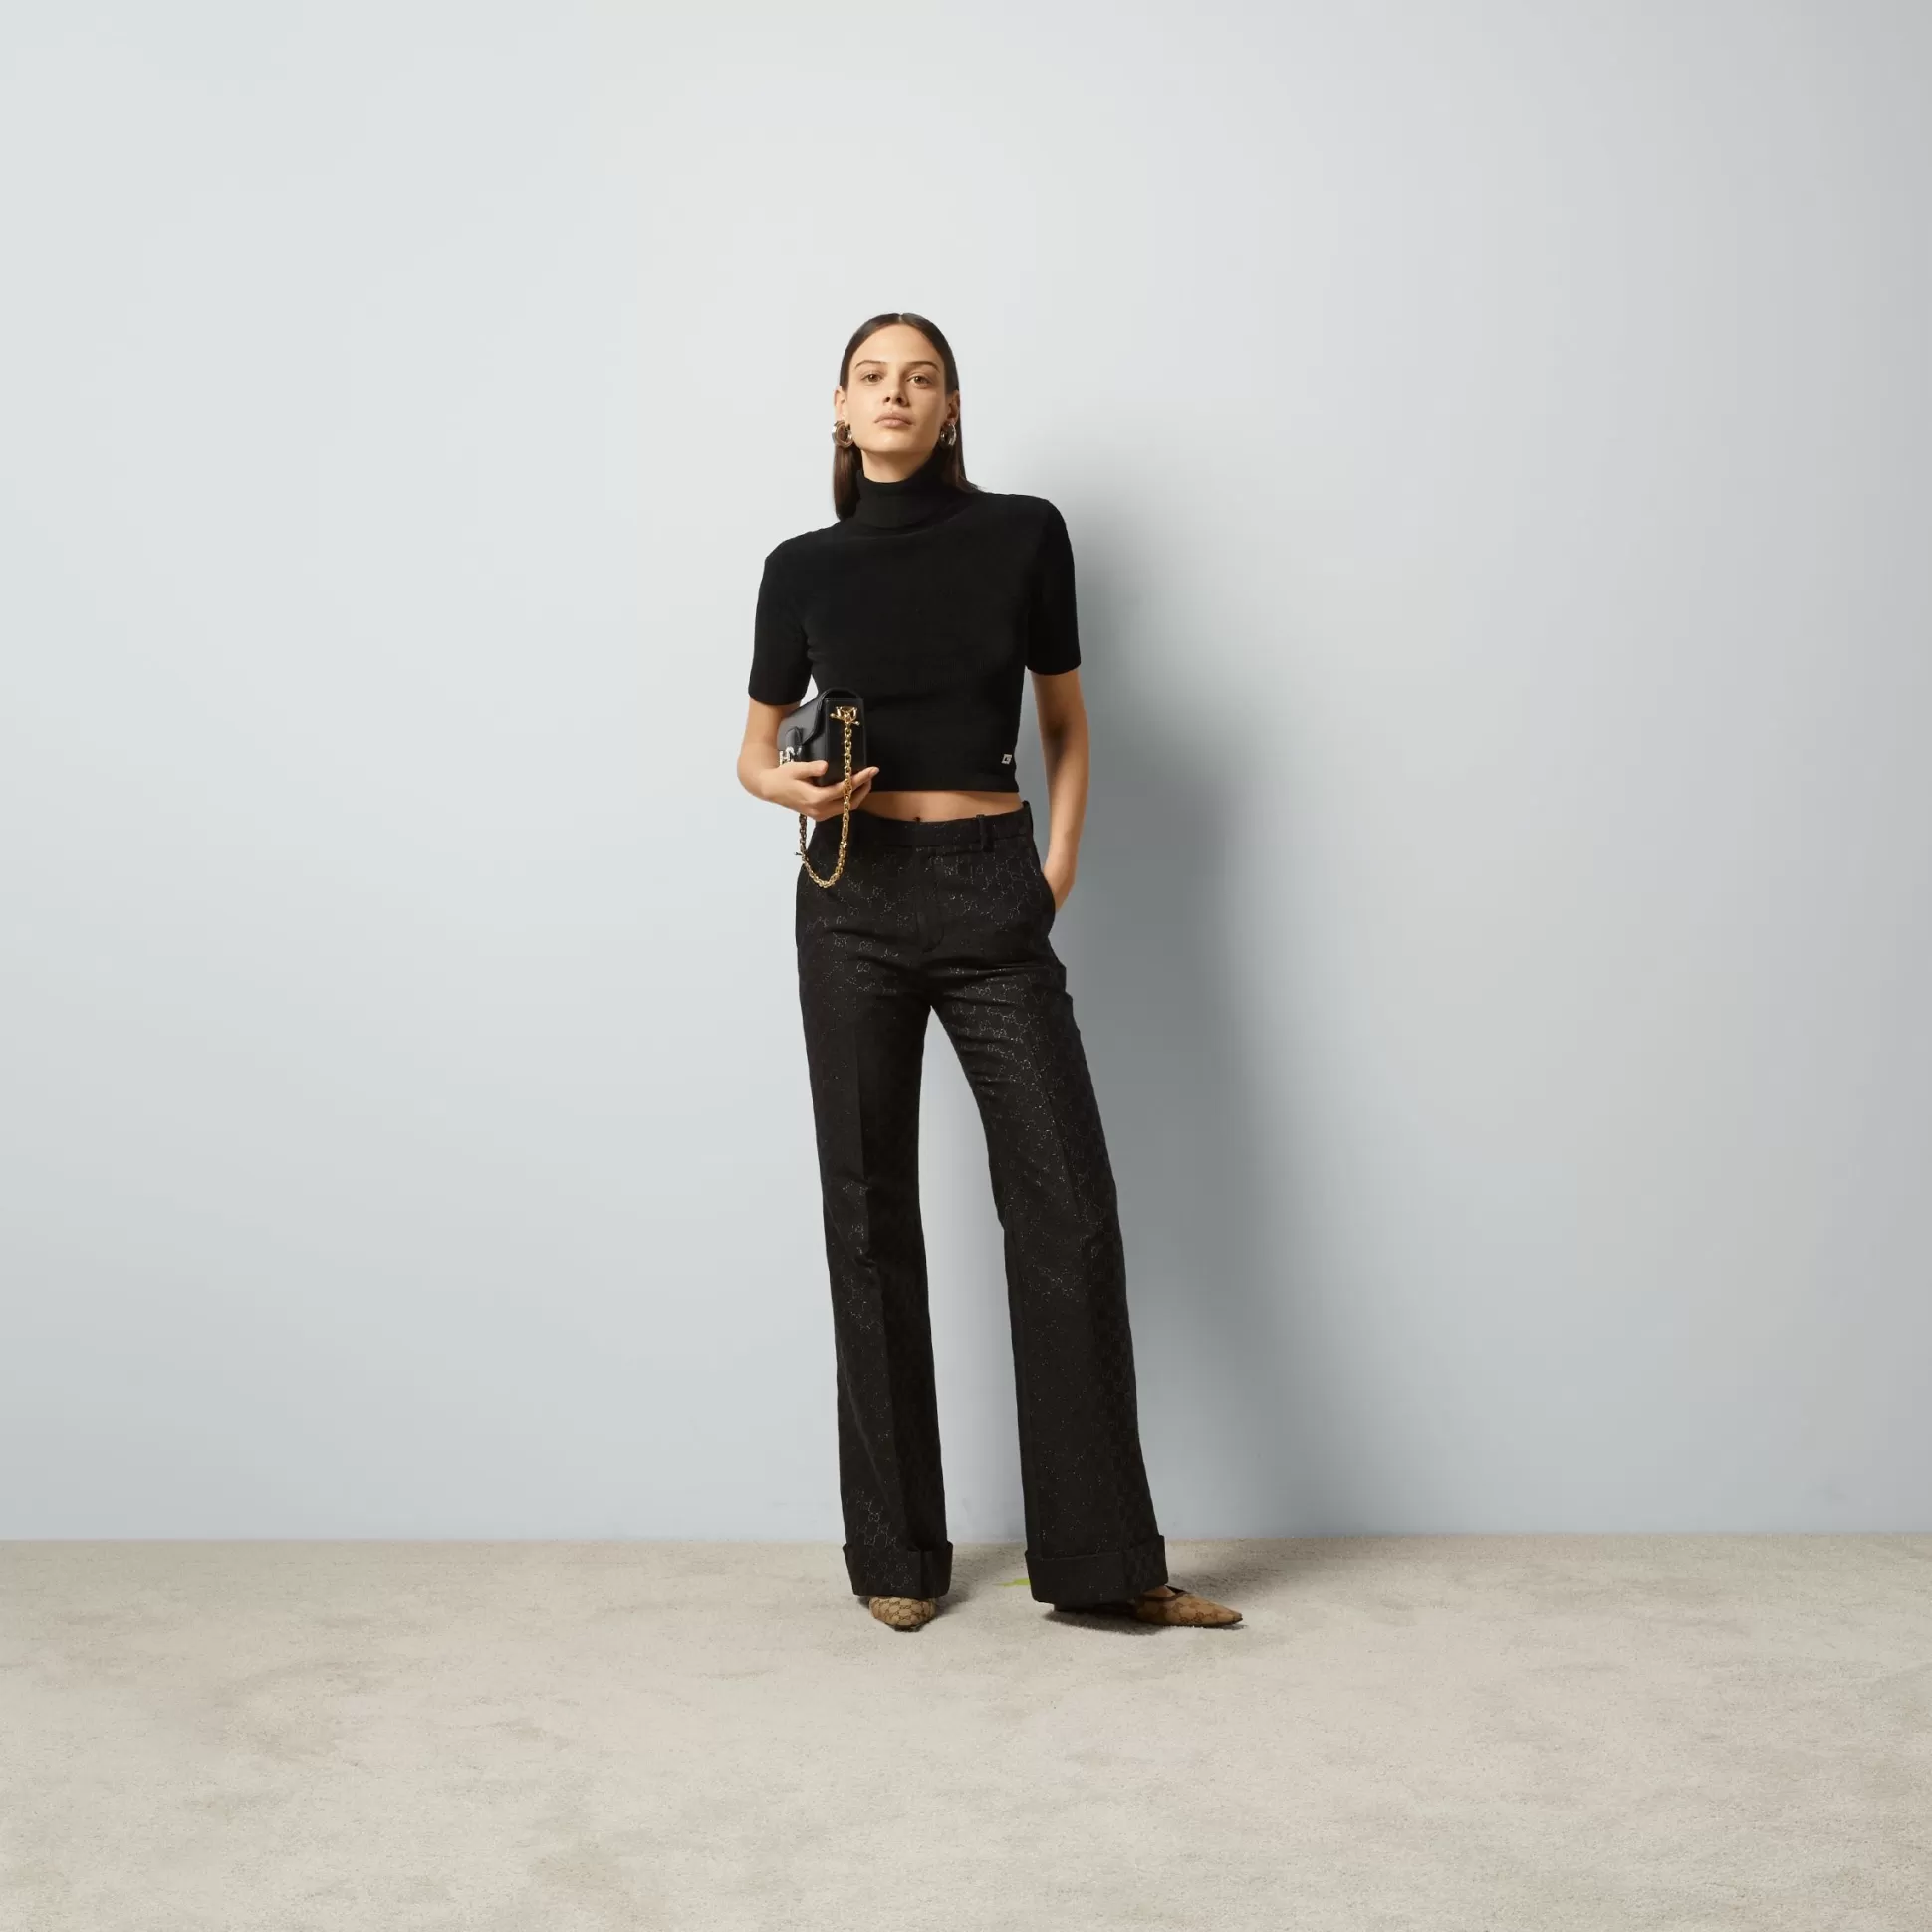 GUCCI Gg Wool Lame Pant-Women Cocktail & Evening